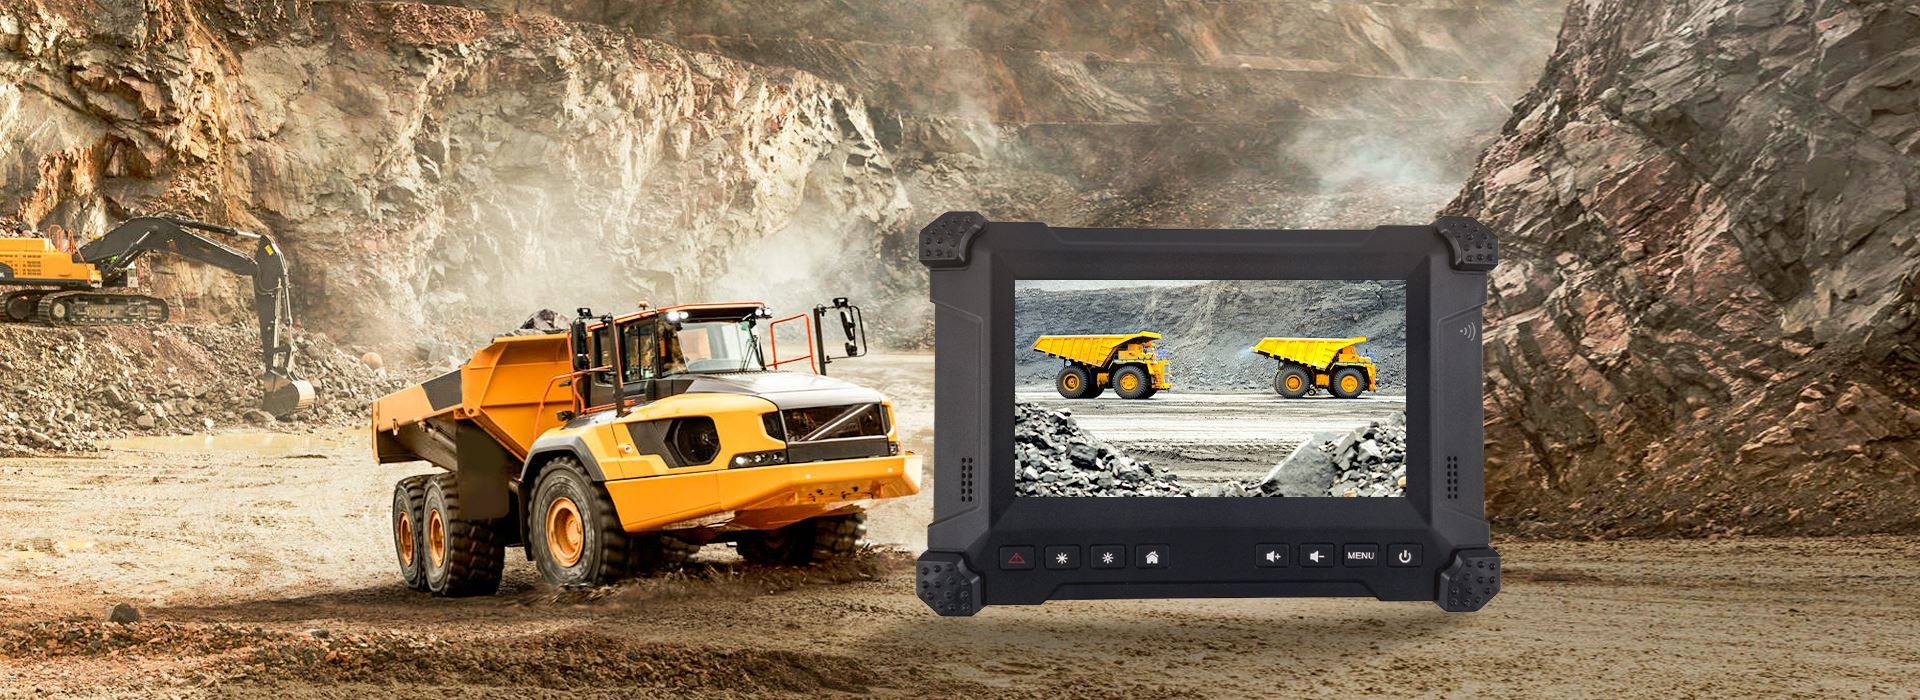 Our rugged driver tablets are widely used